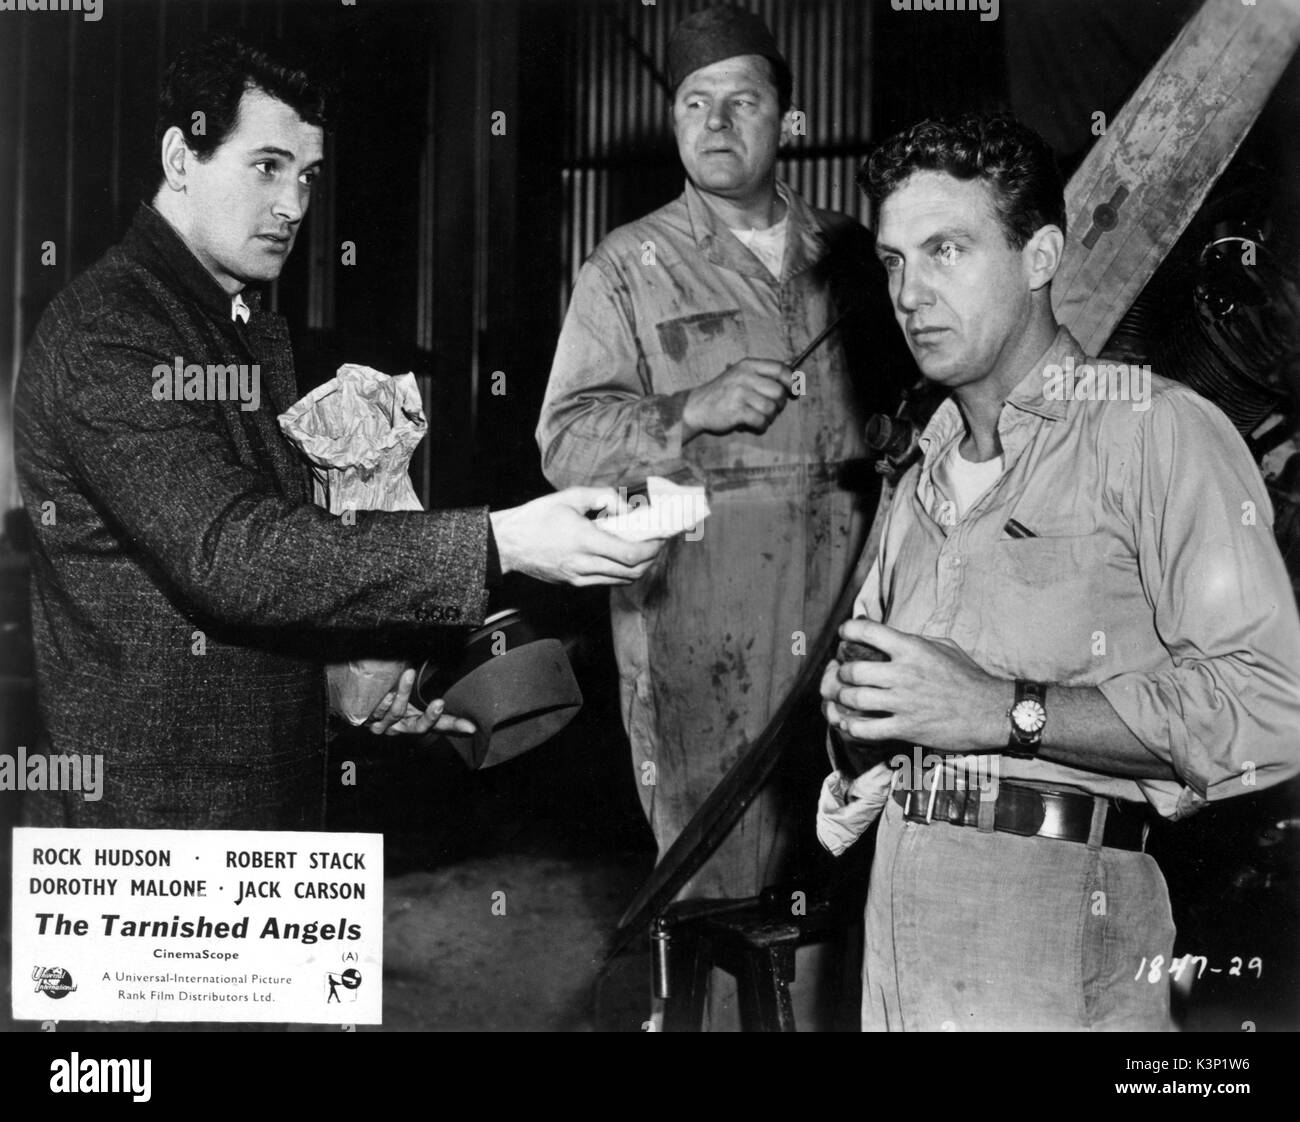 THE TARNISHED ANGELS [US 1957] ROCK HUDSON, JACK CARSON, ROBERT STACK     Date: 1957 Stock Photo